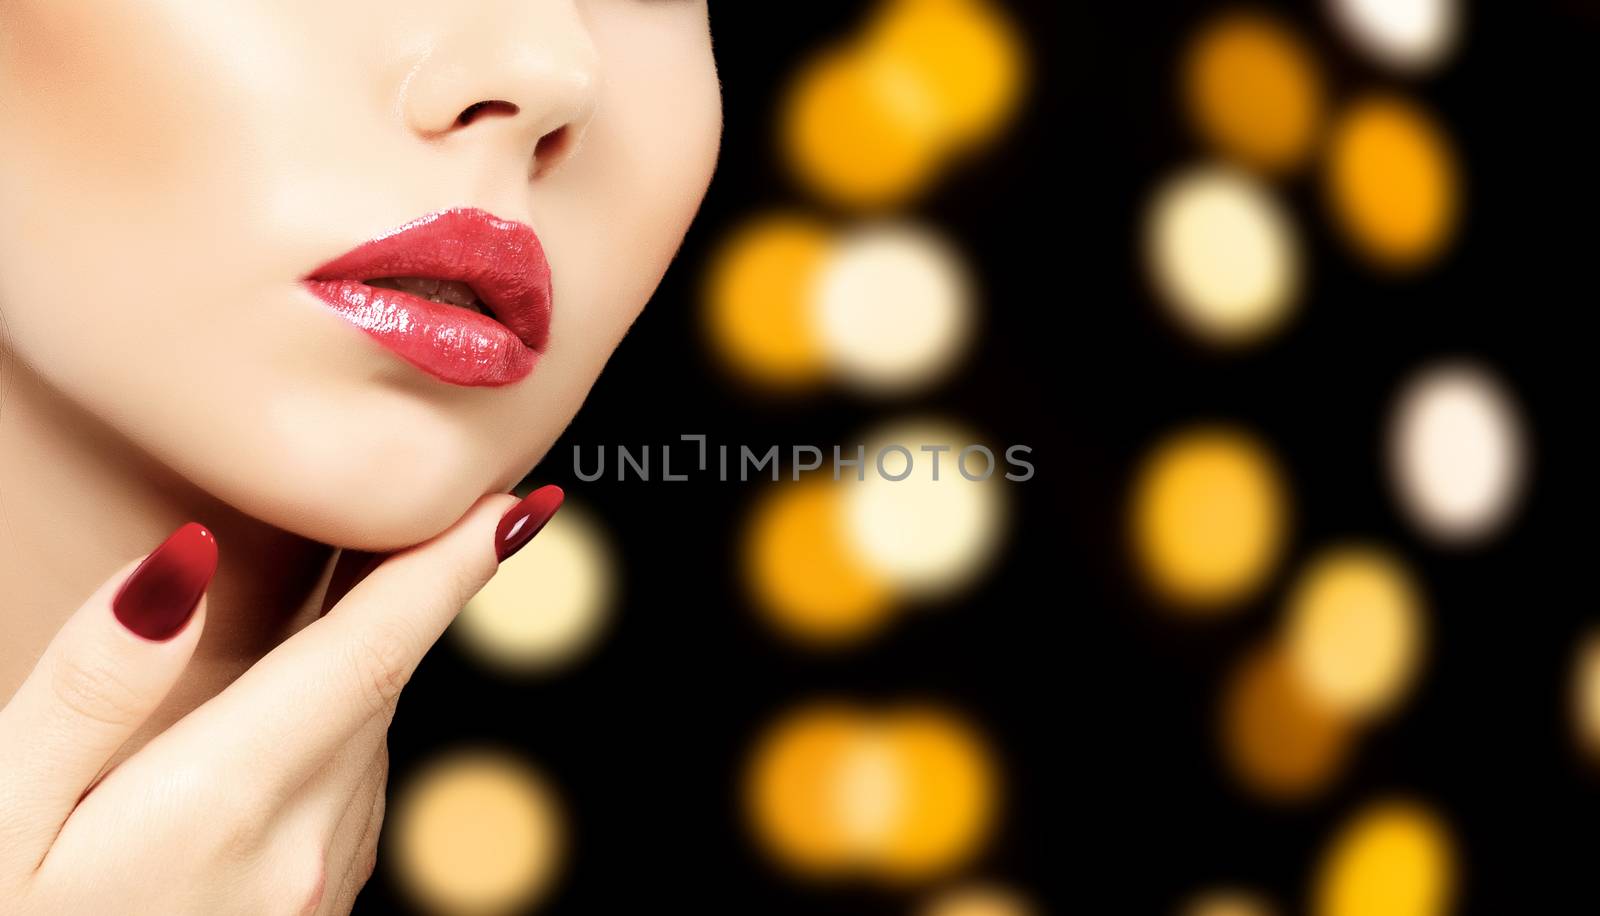 Beautiful woman face against an abstract background with blurred lights